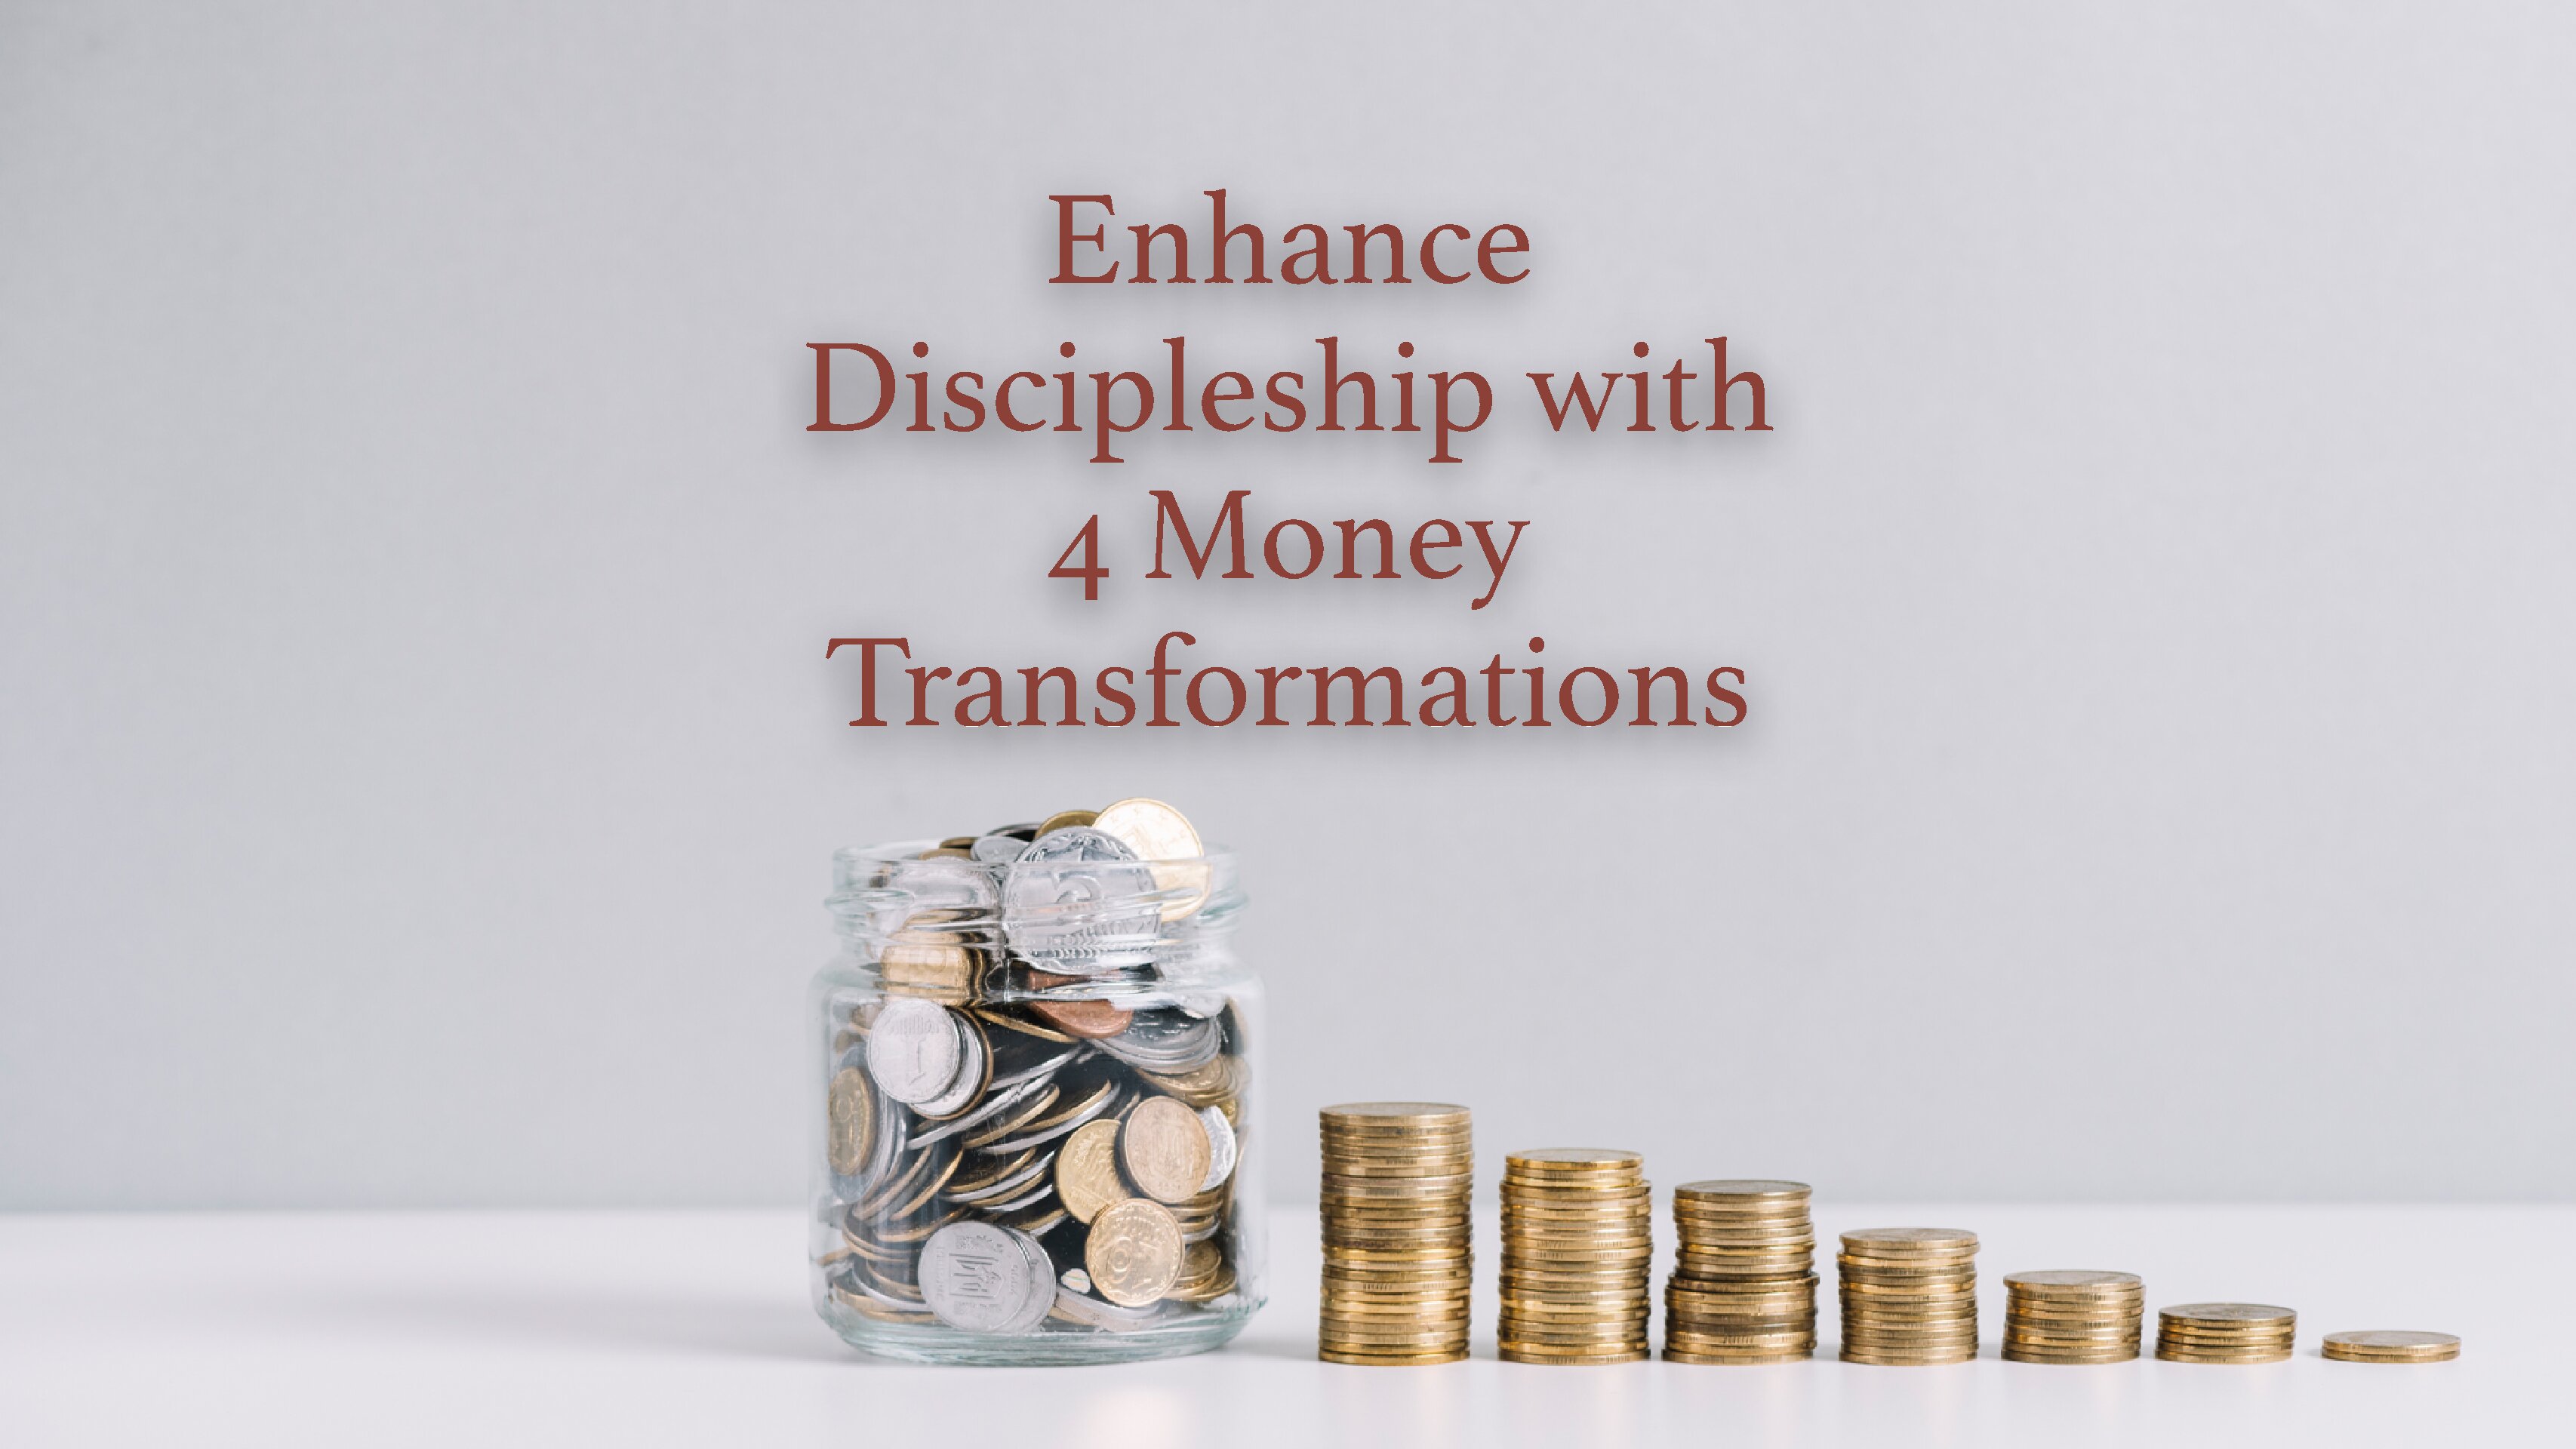 Enhance Discipleship with 4 Money Transformations